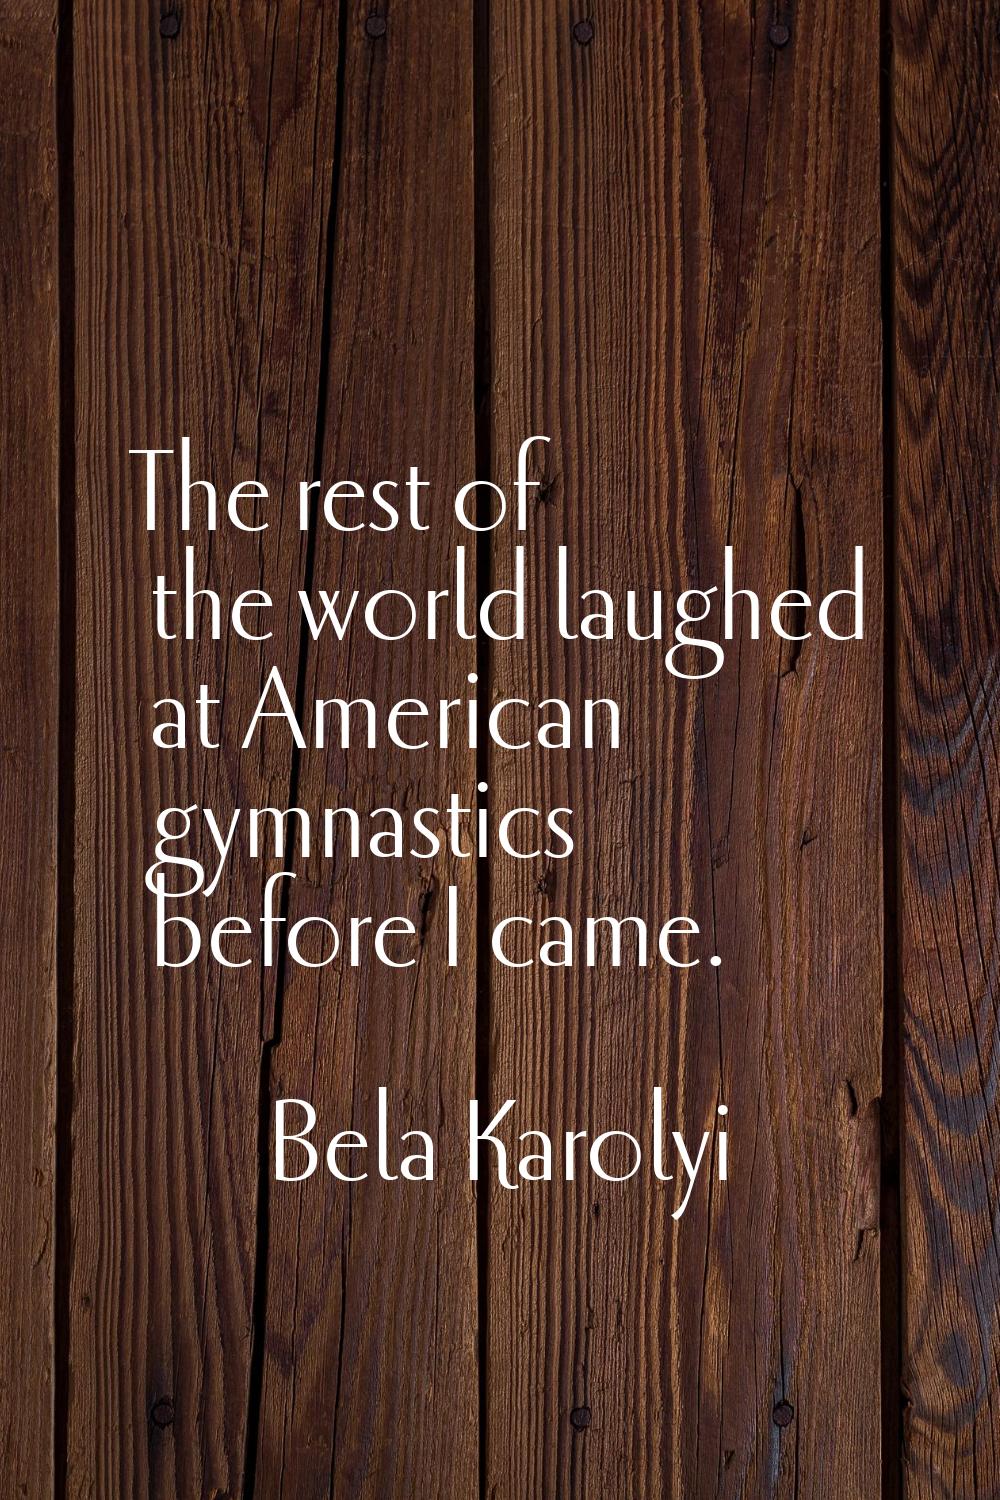 The rest of the world laughed at American gymnastics before I came.